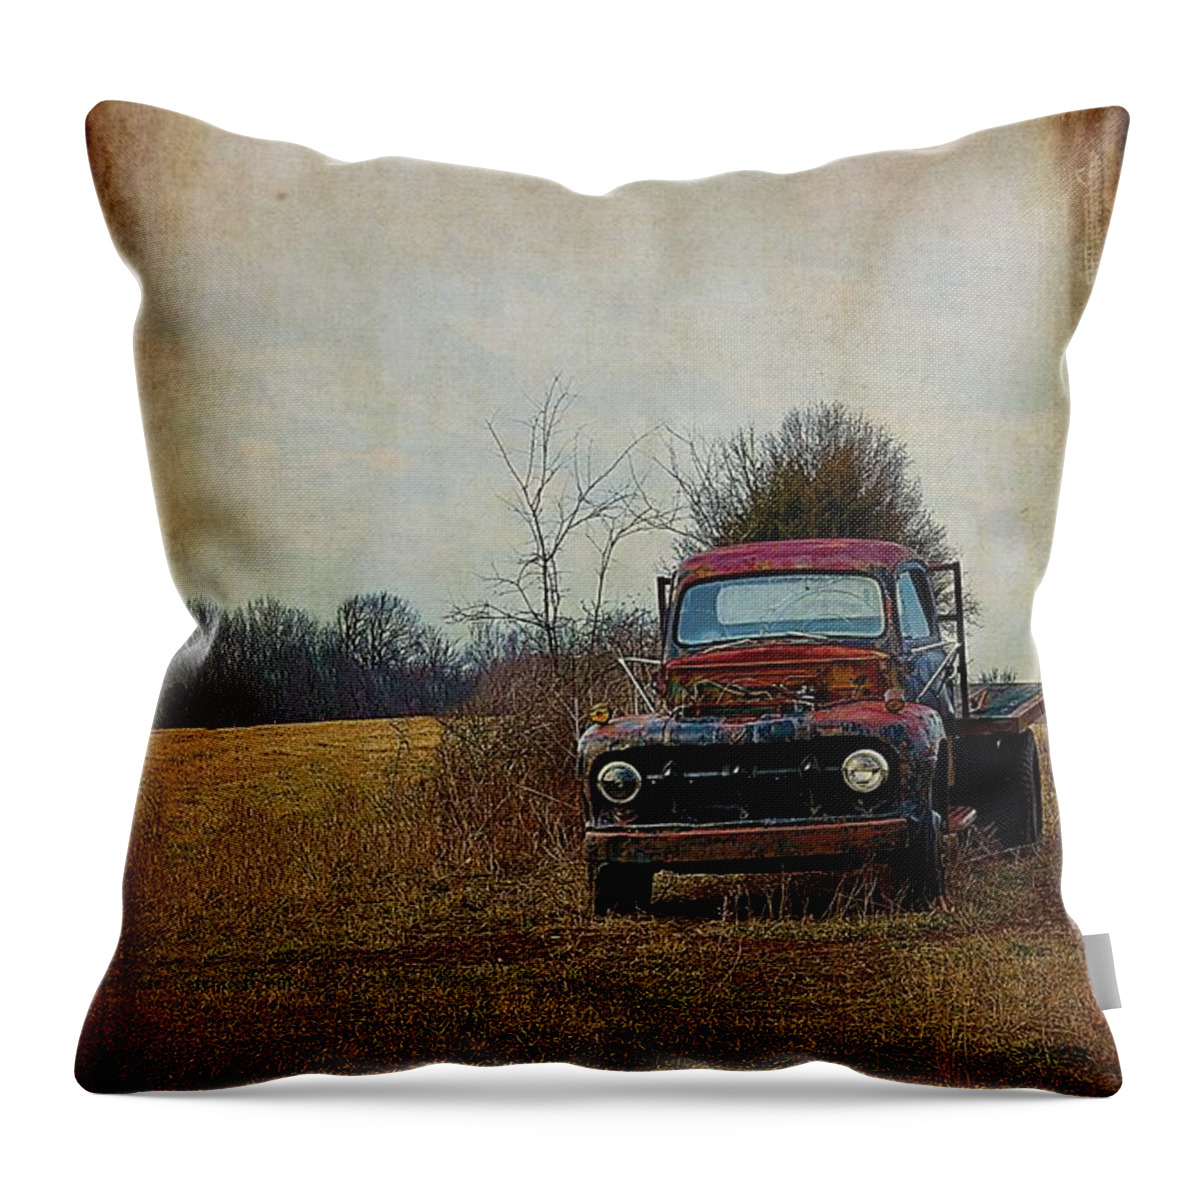 Trucks Throw Pillow featuring the photograph Eternal Resting Place by Jan Amiss Photography